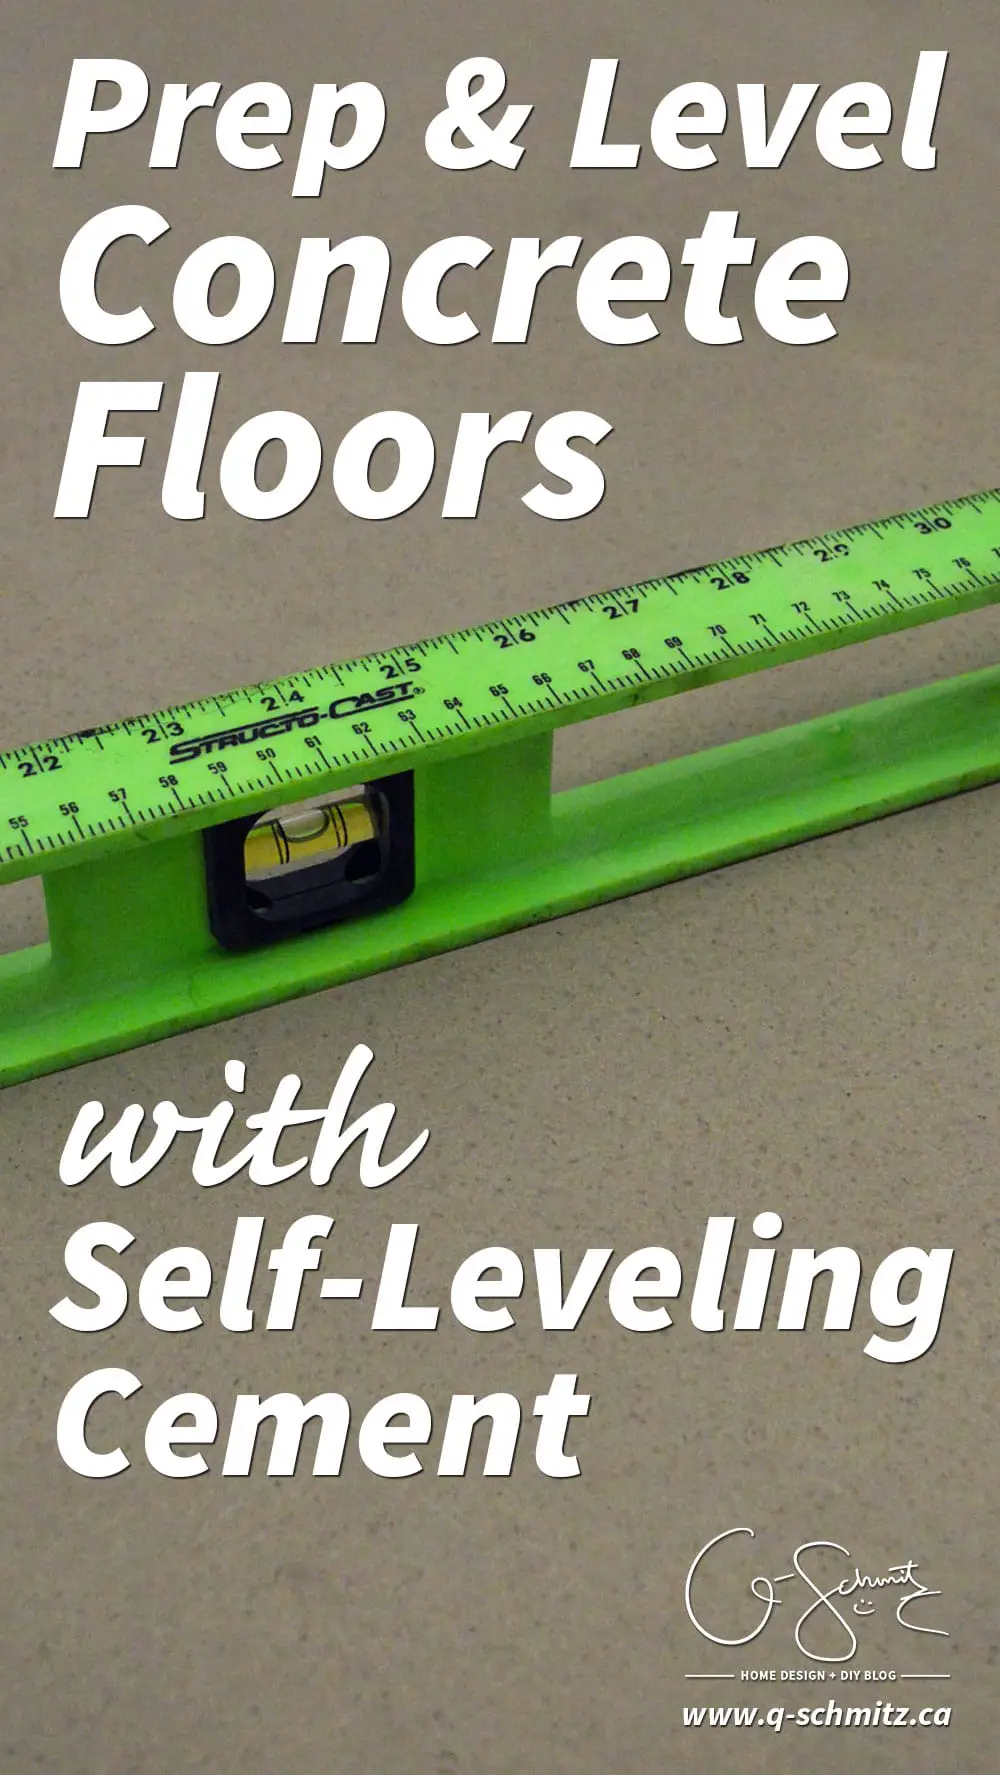 If you've ever worked with some uneven flooring surfaces (or are planning to), then you'll definitely need to know how to prep and level concrete floors!